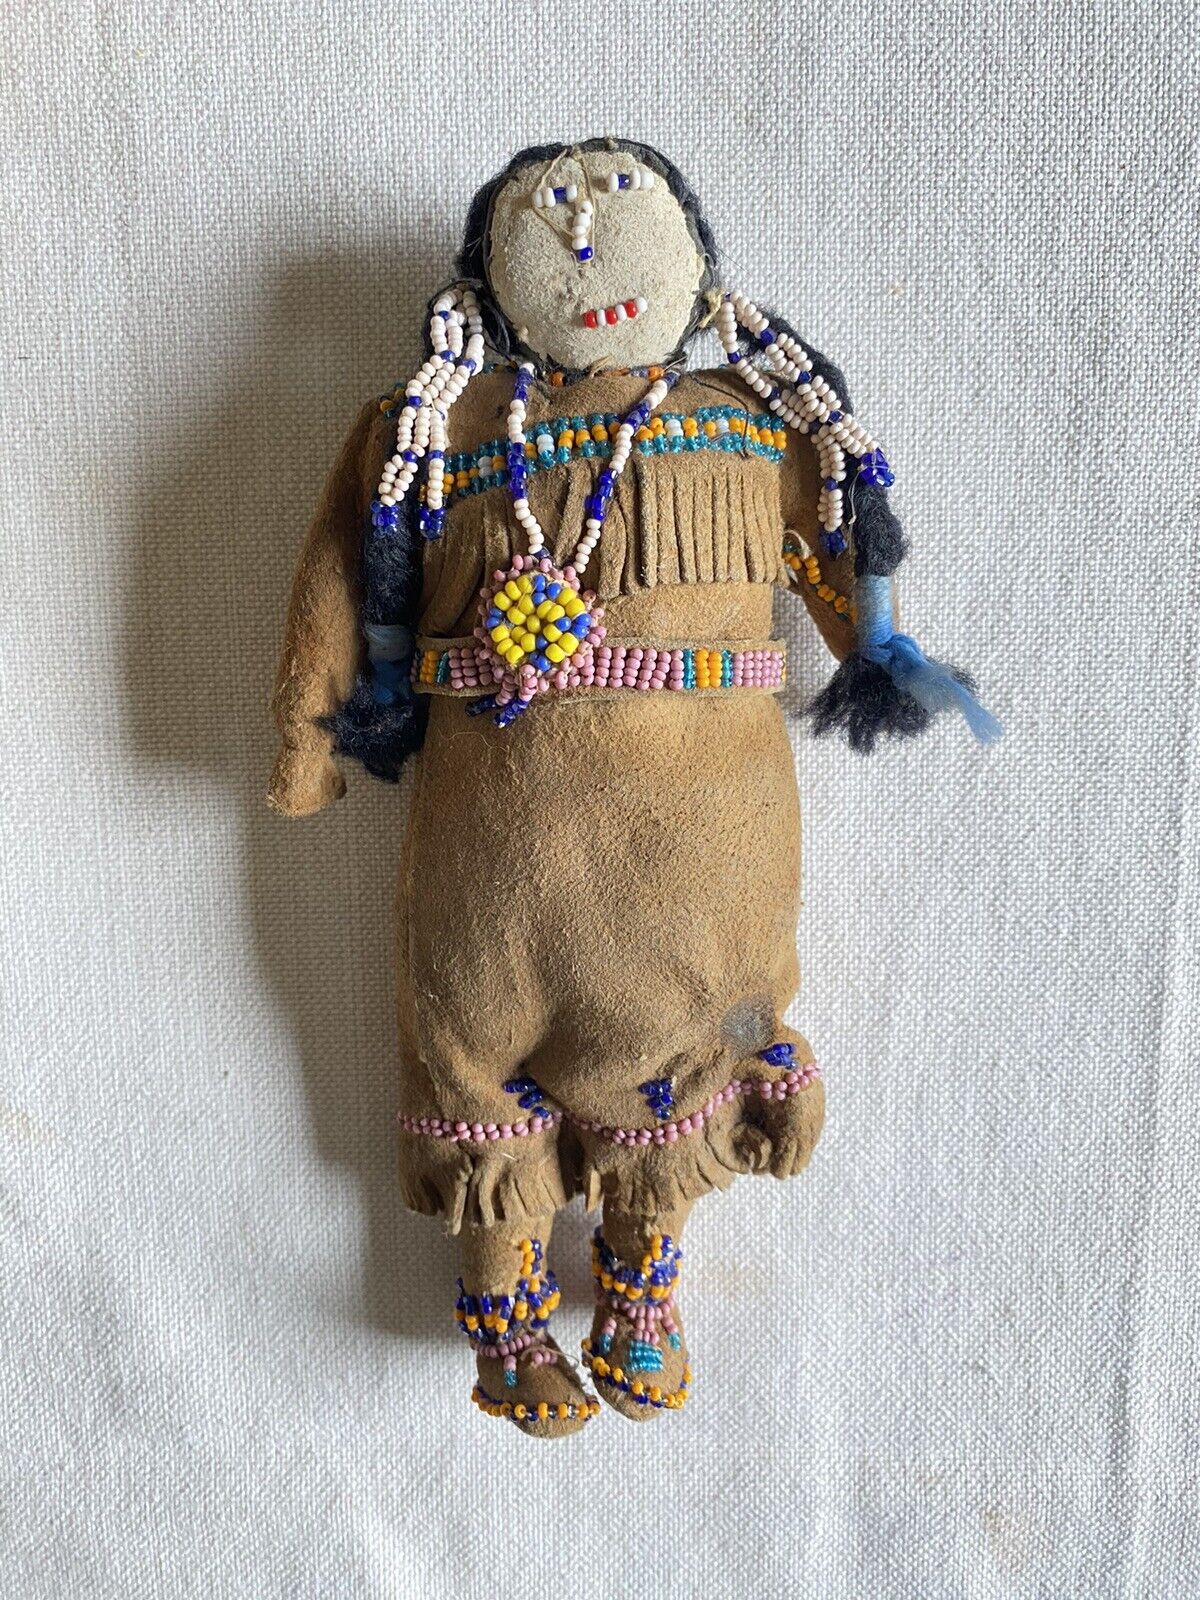 Antique Handmade Northern Plains Tribe Native American Indian Tanned Deer Doll